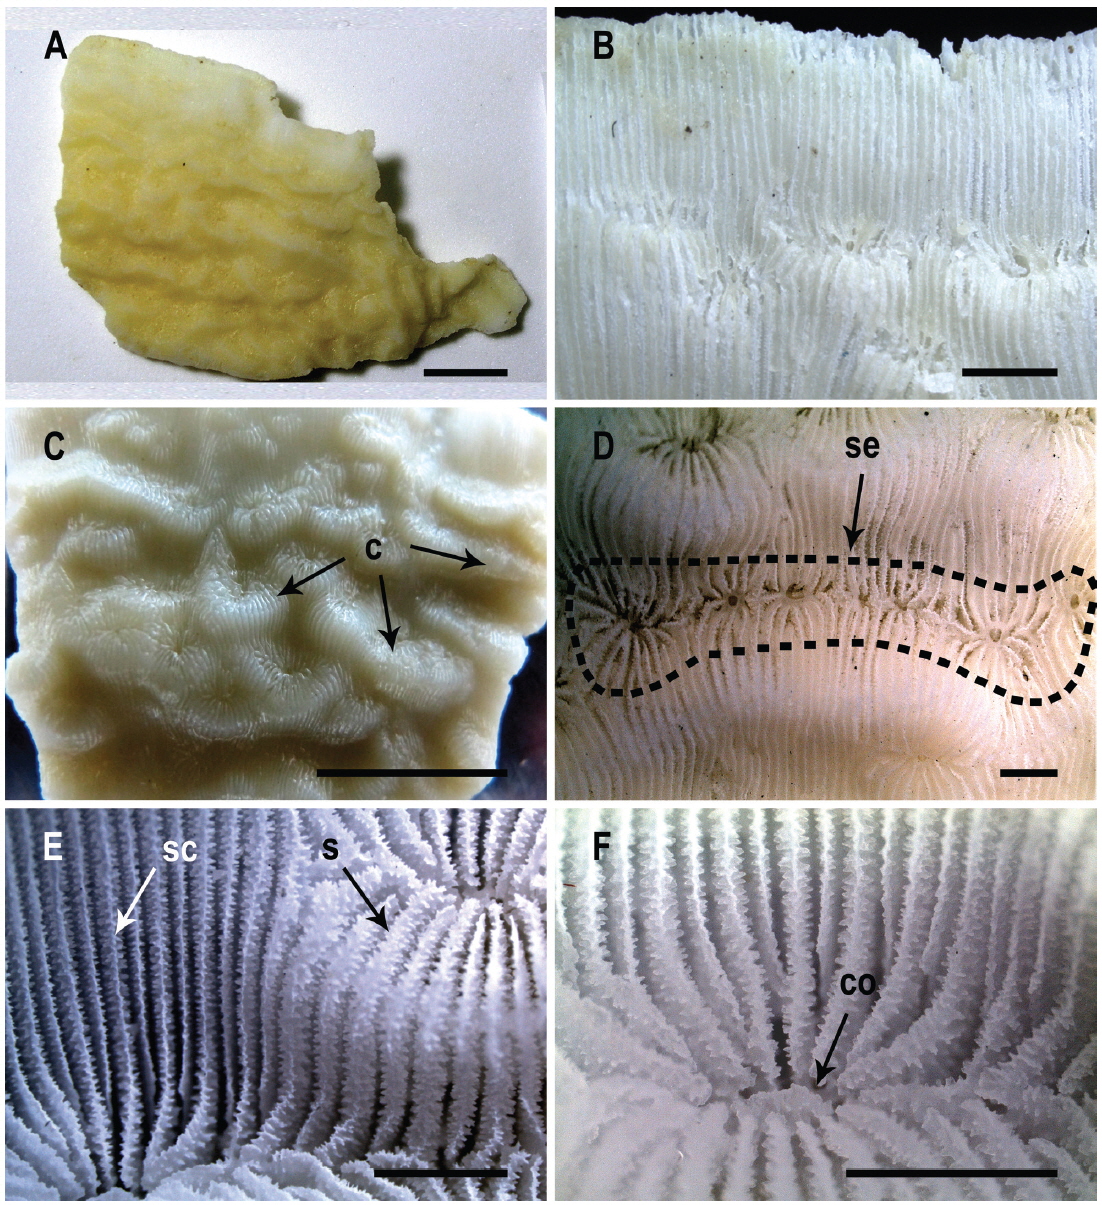 Leptoseris mycetoseroides. A, Growth form, platelike; B, Margins of corallum; C, Collines (c); D, Series of corallites by intratentacular budding (se); E, Septocostae (sc) and septa (s); F, Columella (co), single styliform. Scale bars: A, C=1 cm, B, D-F=1 mm.